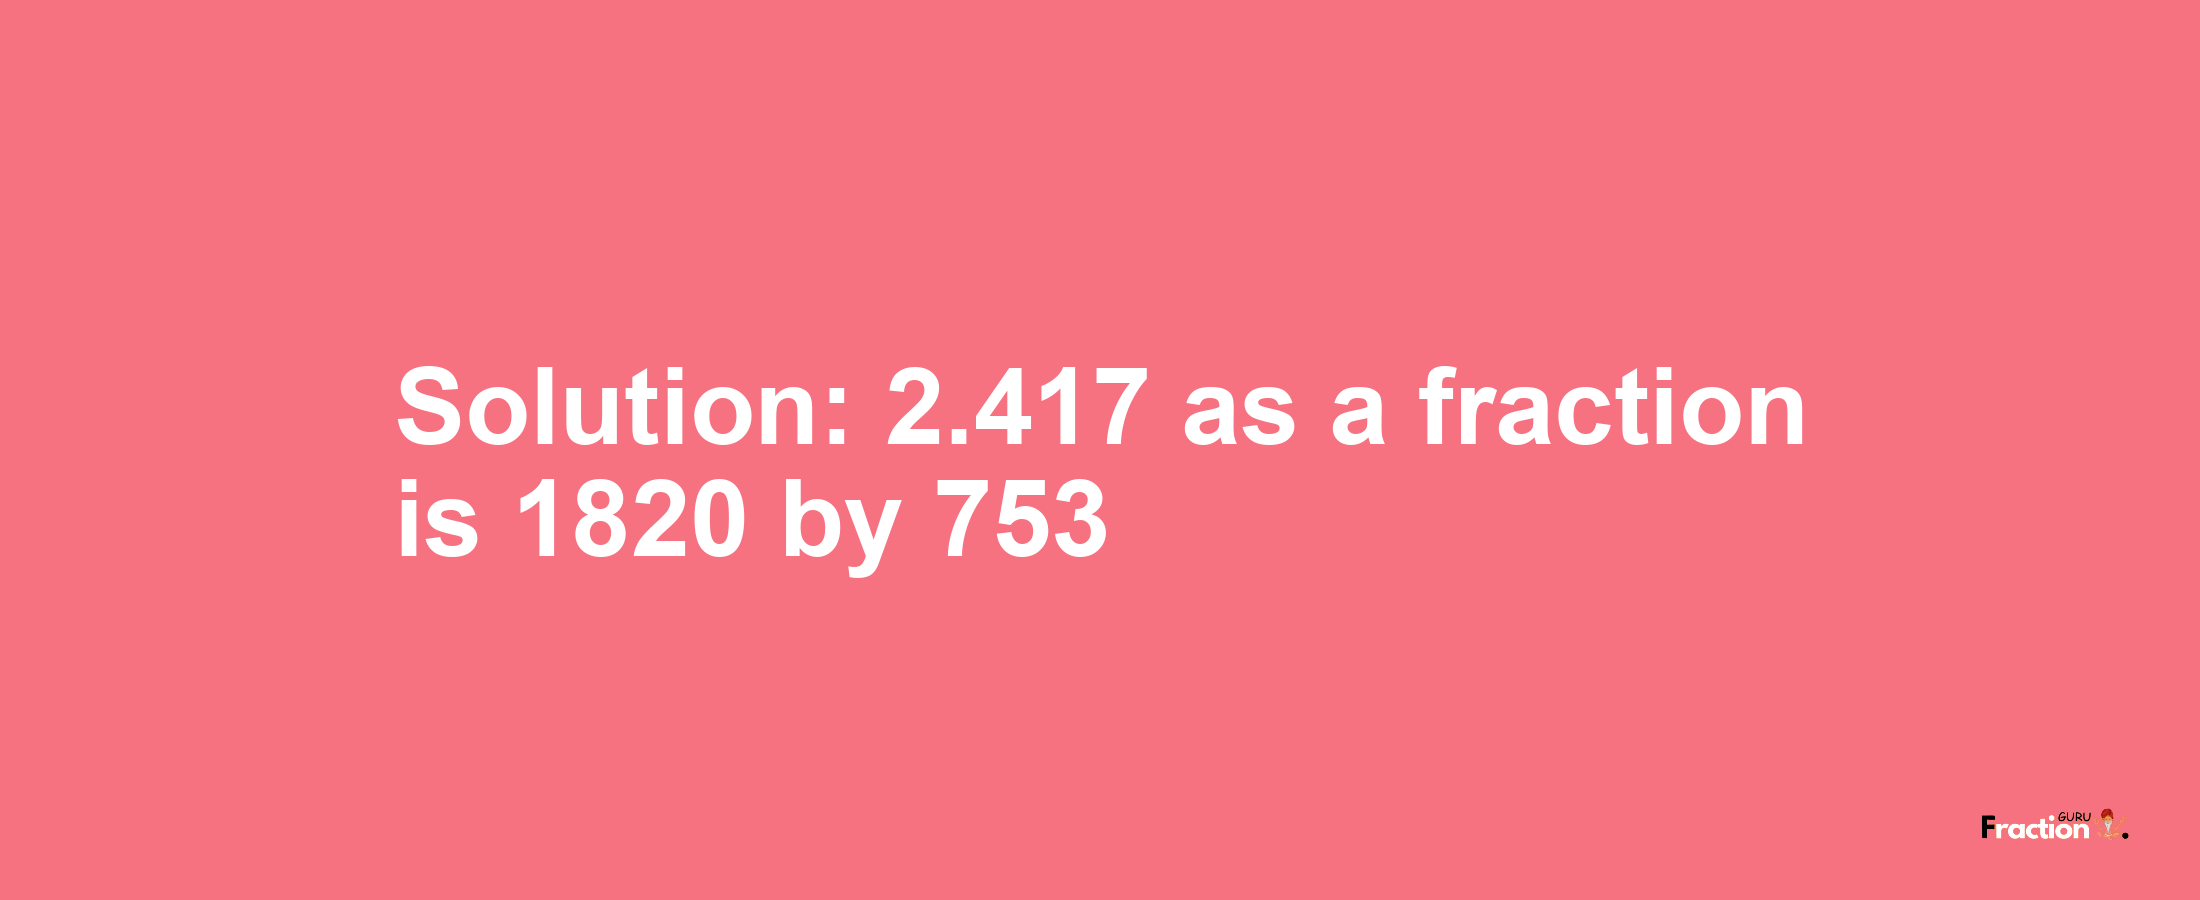 Solution:2.417 as a fraction is 1820/753